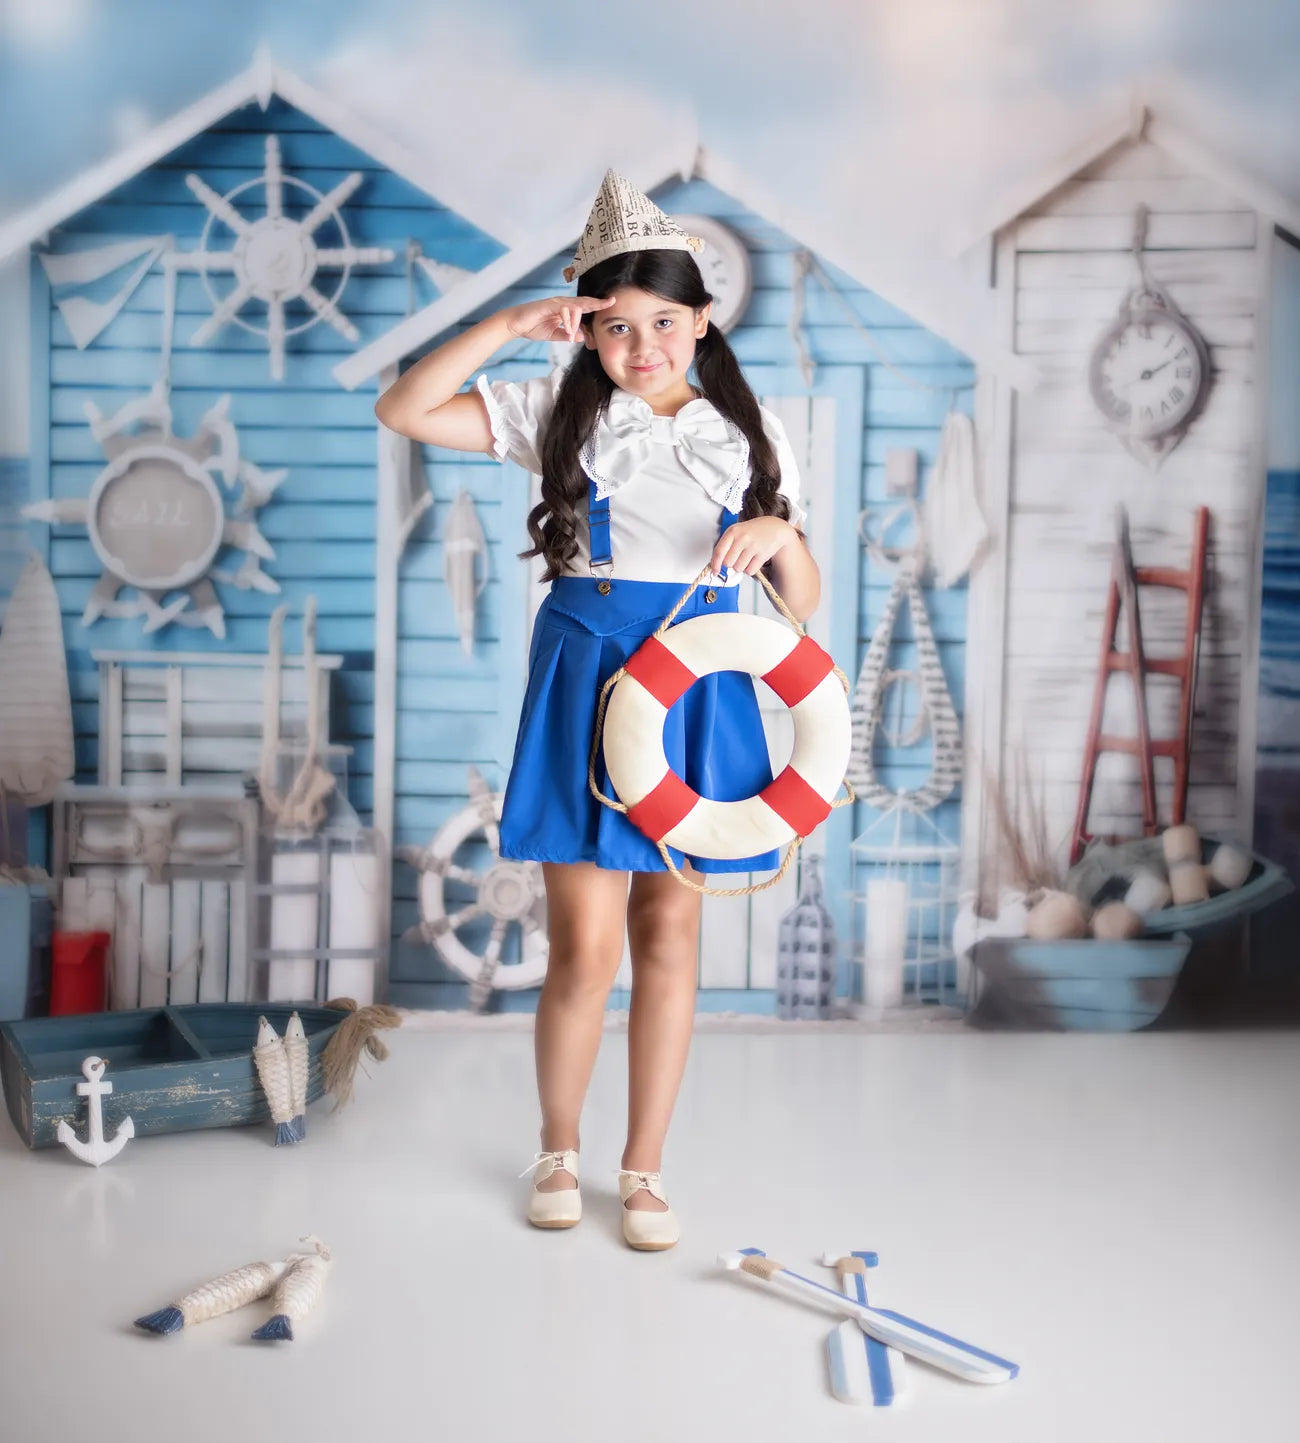 Kate Seaside Nautical Summer Blue House Backdrop Designed by Chain Photography